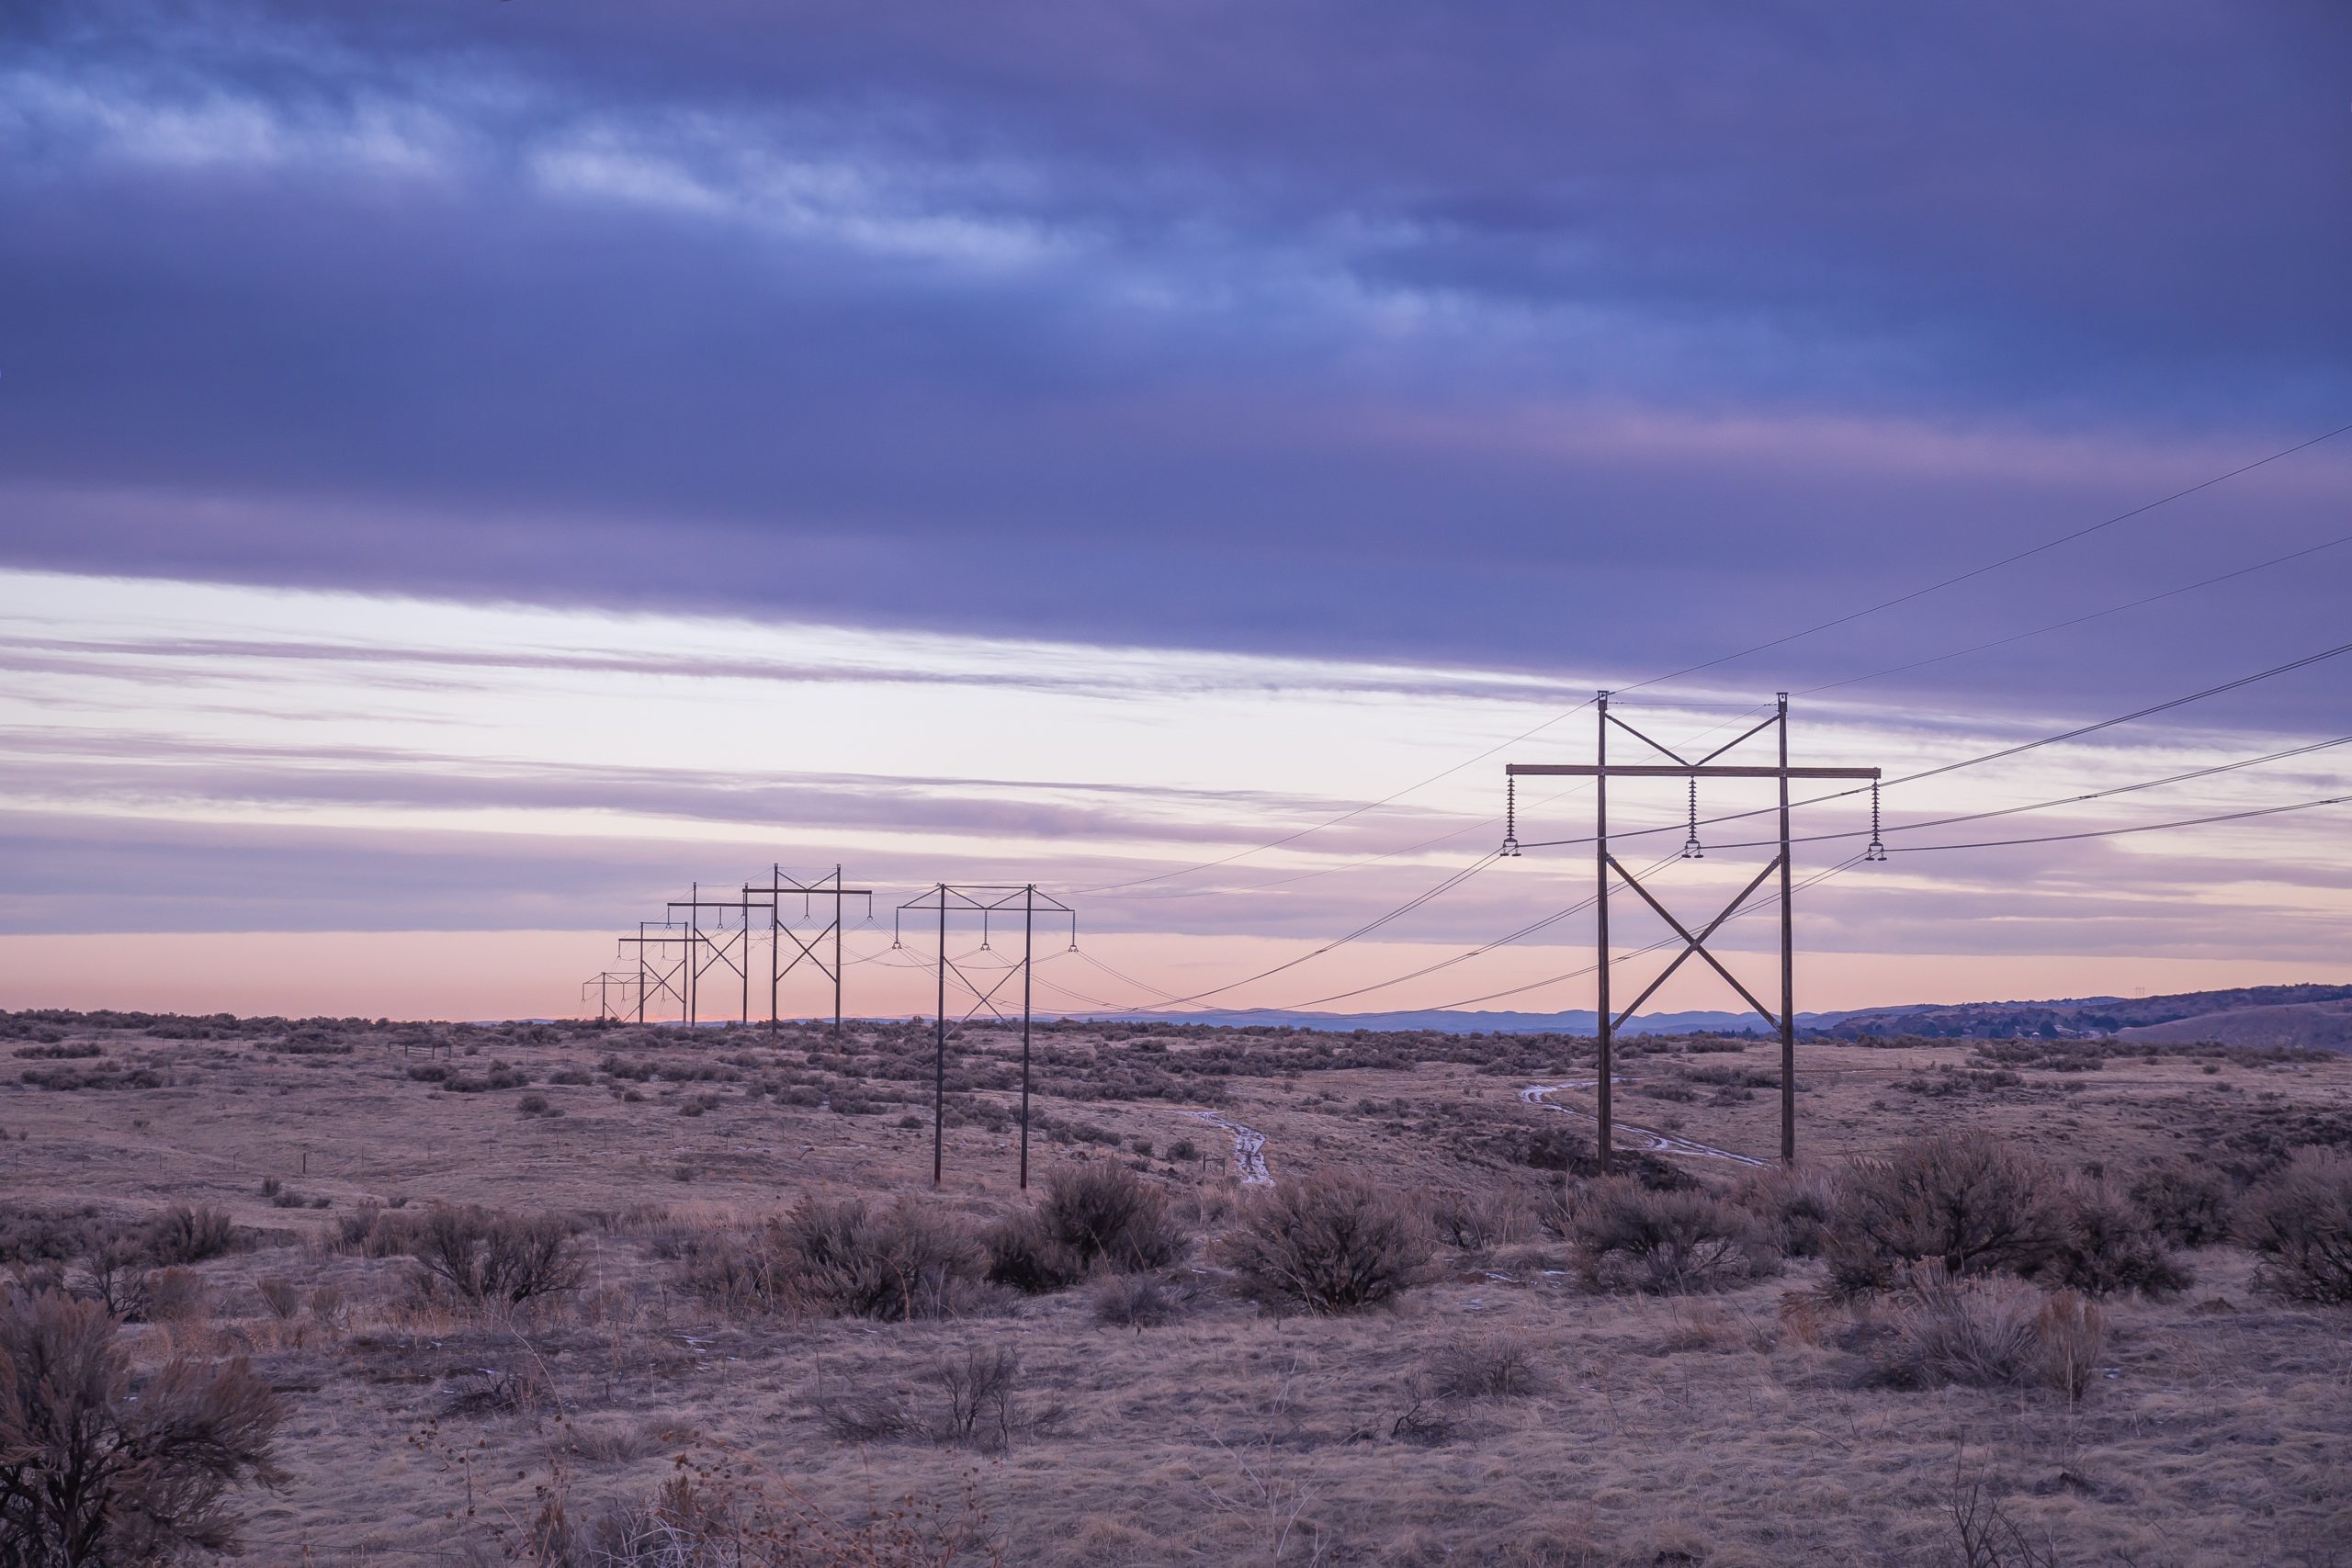 How a desert water utility helped protect critical infrastructure